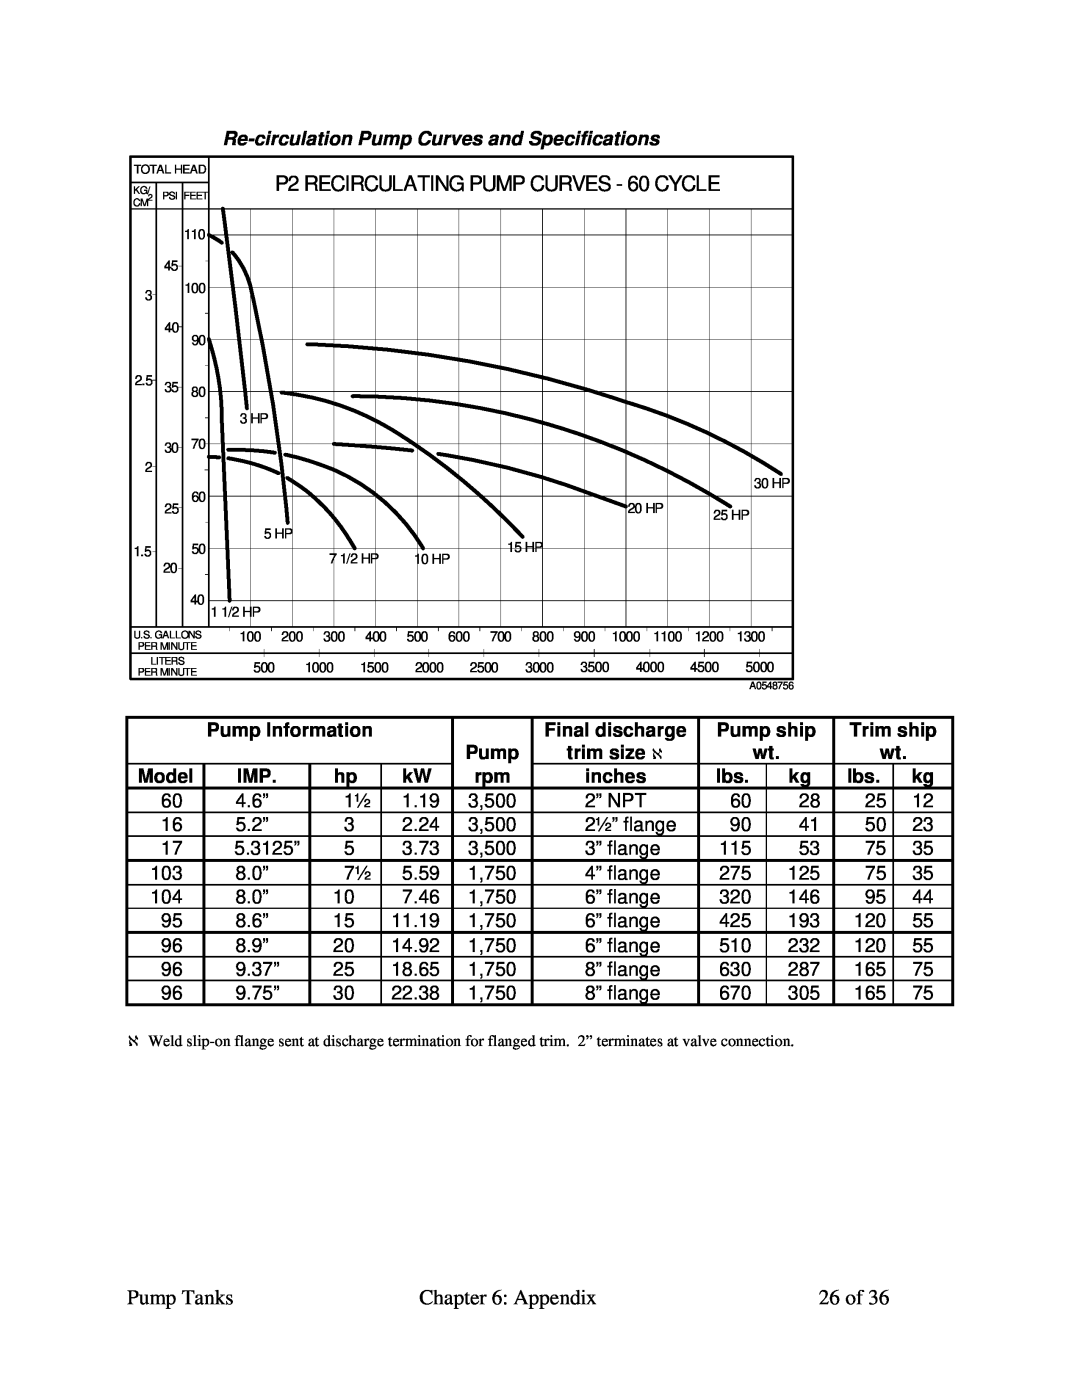 Sterling A0552321 P2 RECIRCULATING PUMP CURVES - 60 CYCLE, Re-circulation Pump Curves and Specifications, Pump Information 